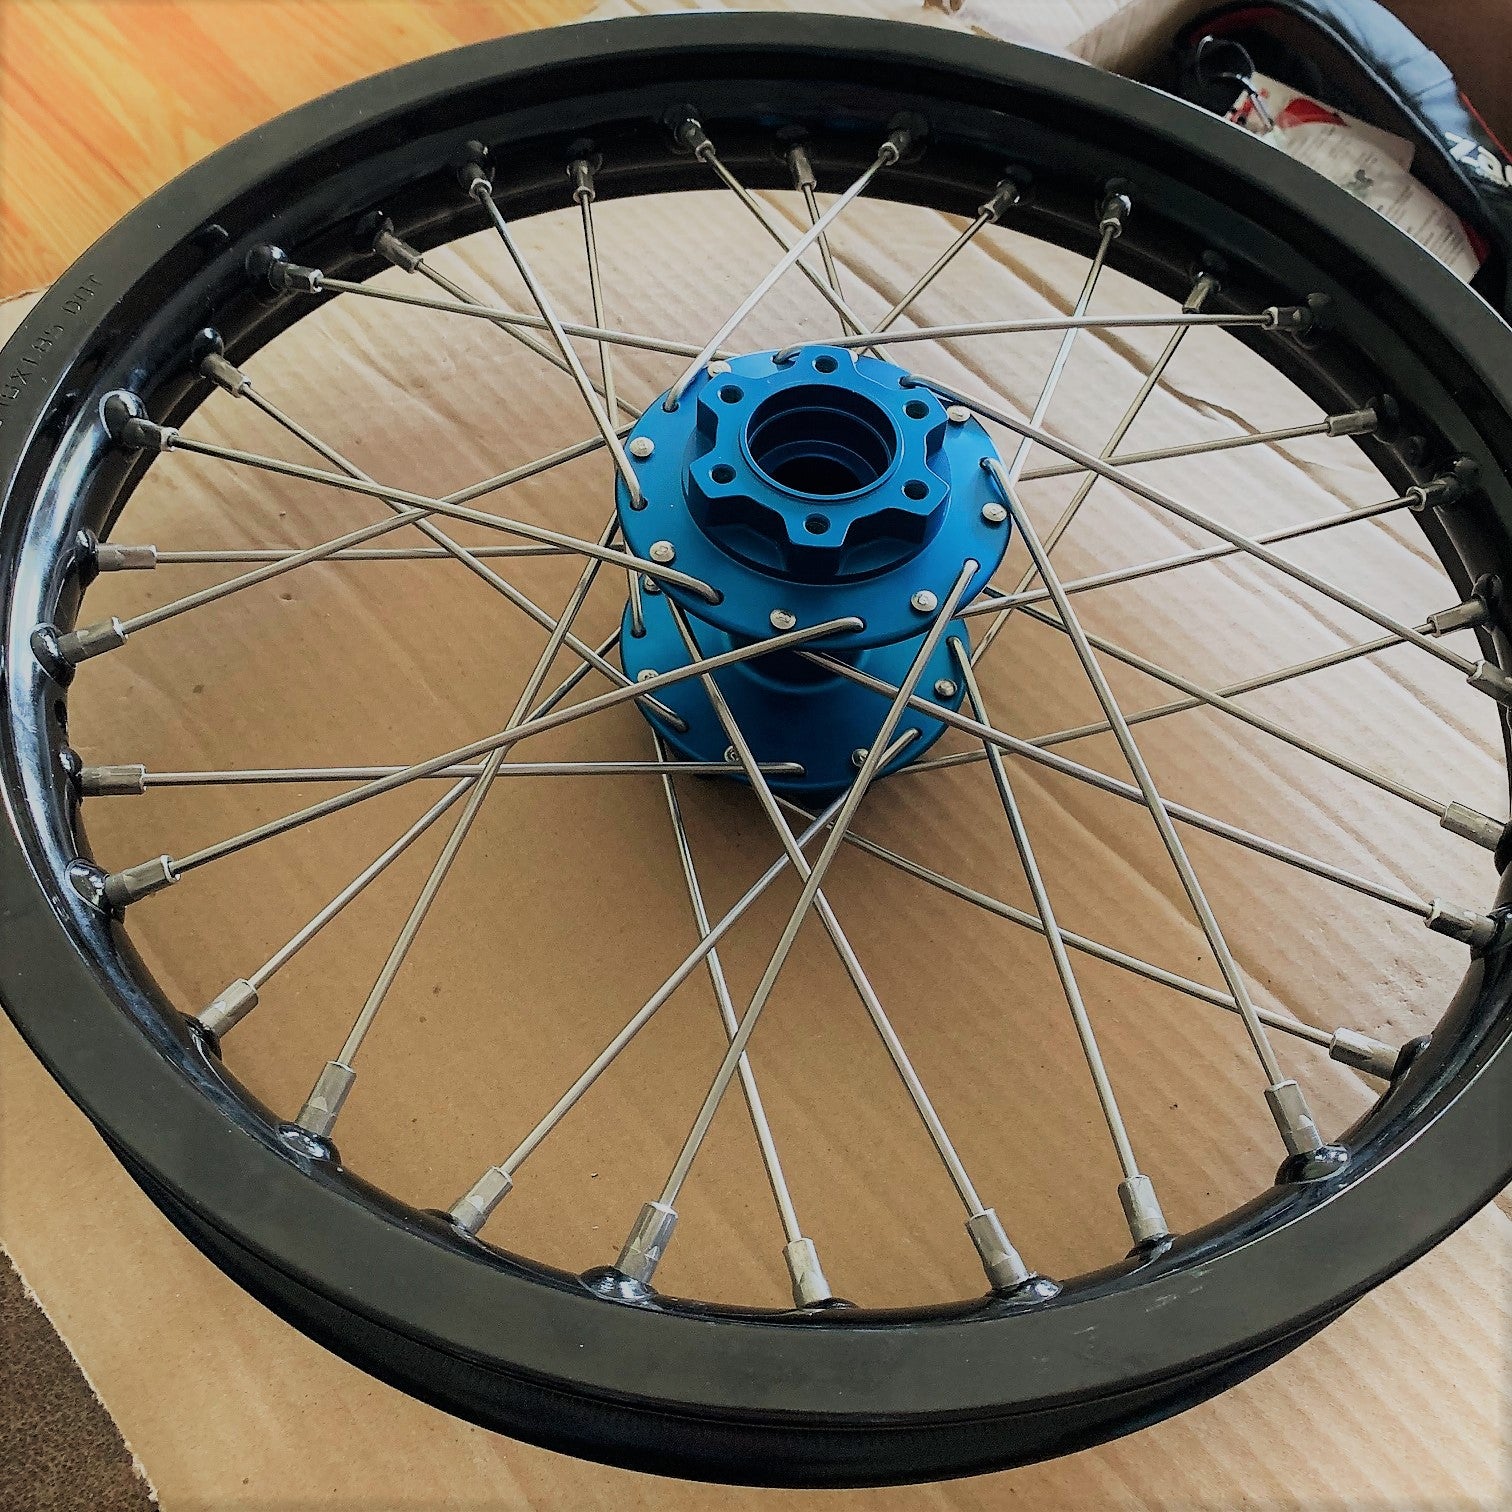 16" Charged Rear Wheel Upgrade for Surron LBX and E Ride Pro